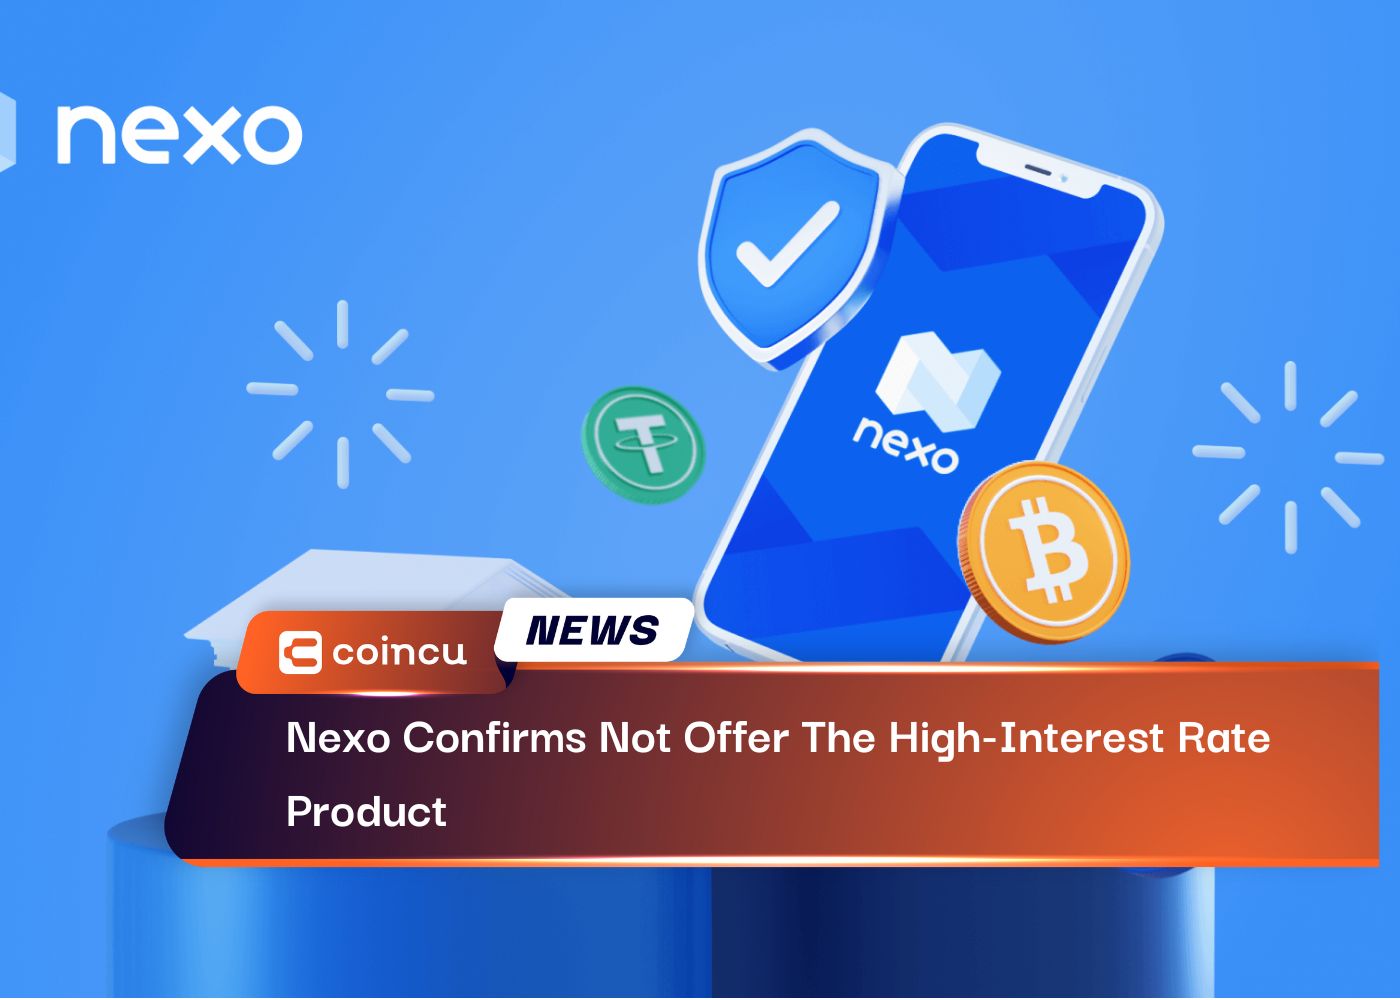 Nexo Confirms Not Offer The High-Interest Rate Product